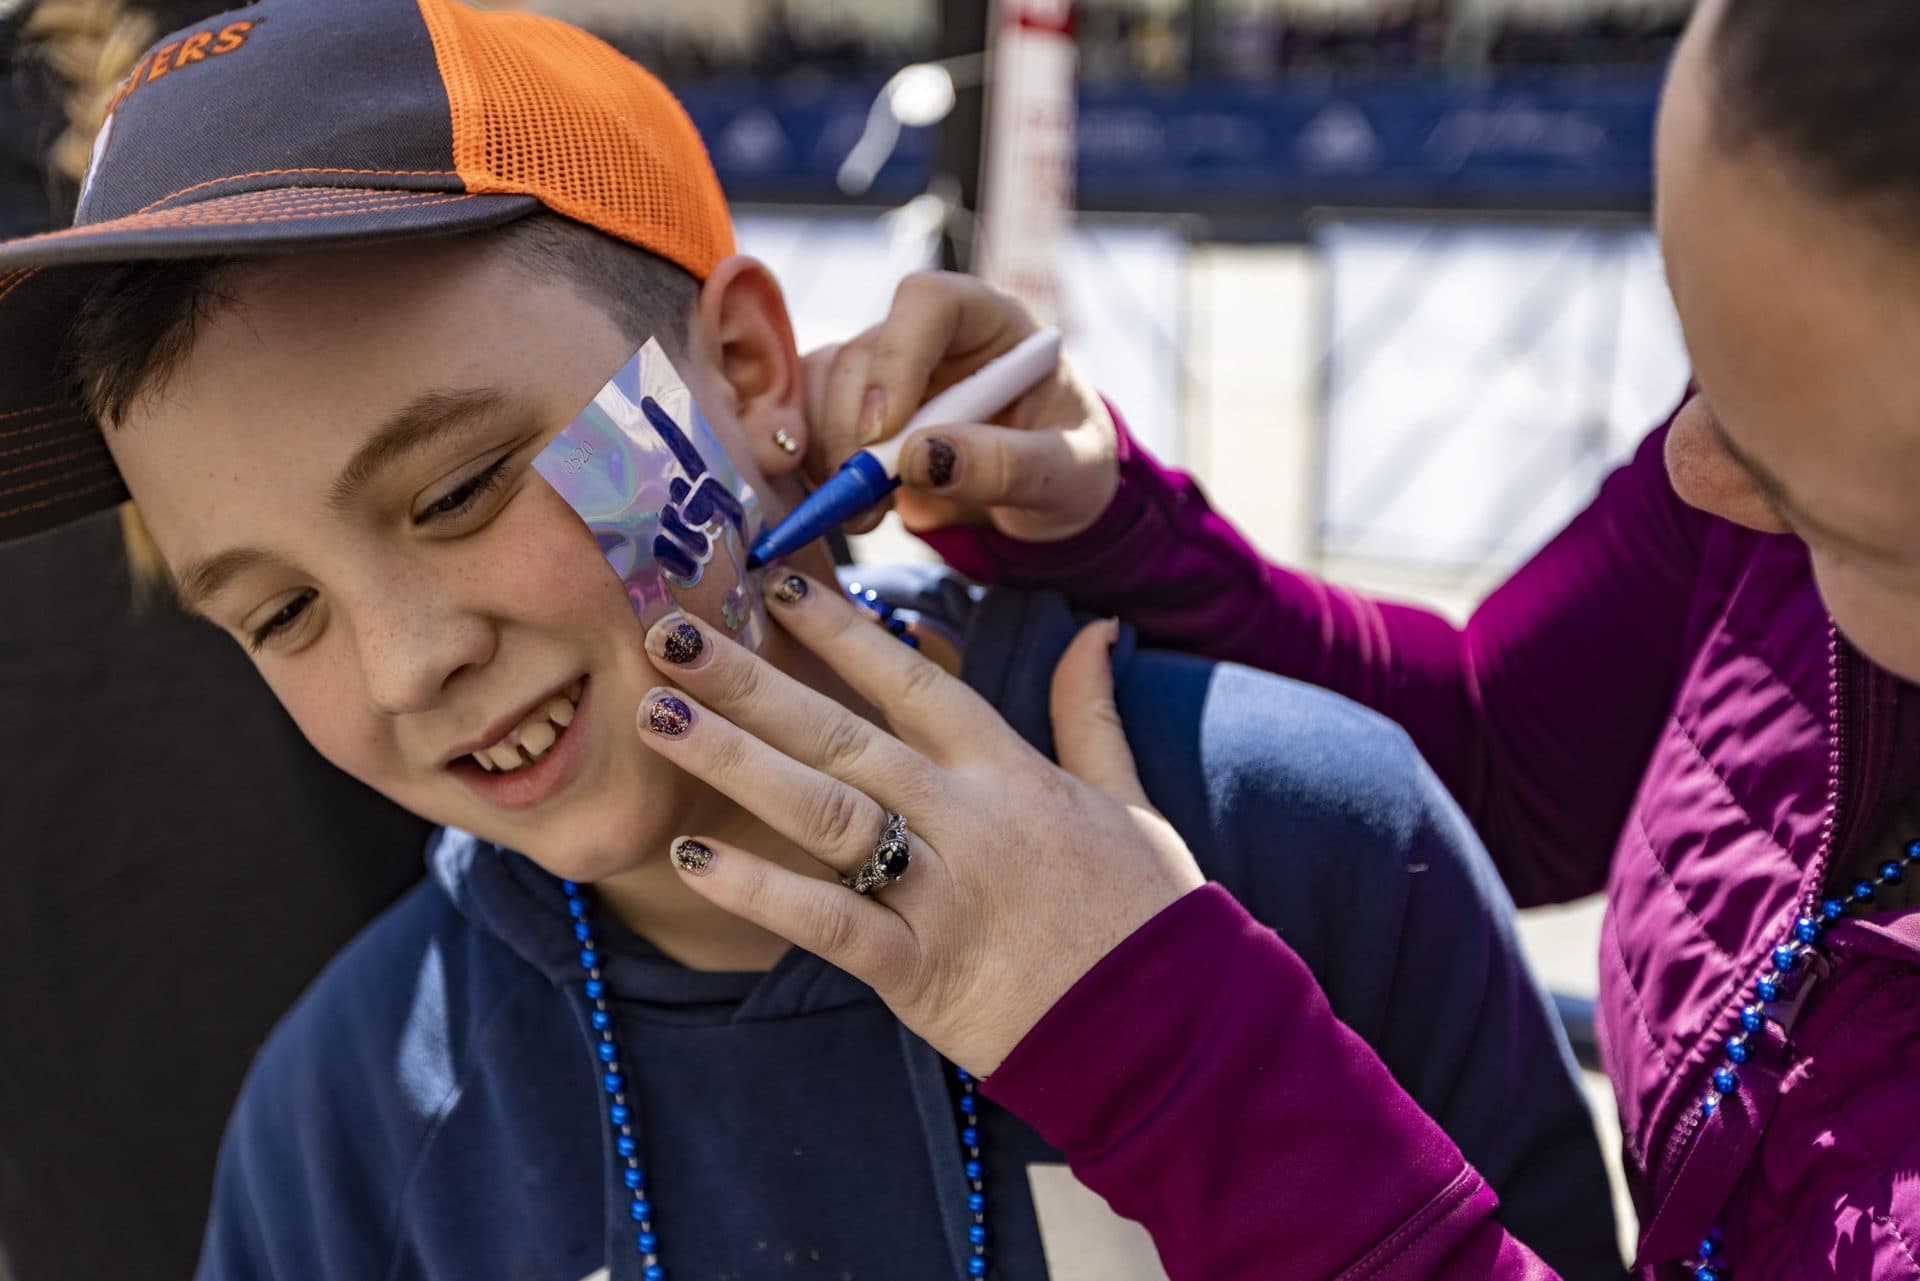 Ayden Porter gets a “Number 1 finger” face tattoo from his mother Jackie on Boylston Street. (Jesse Costa/WBUR)